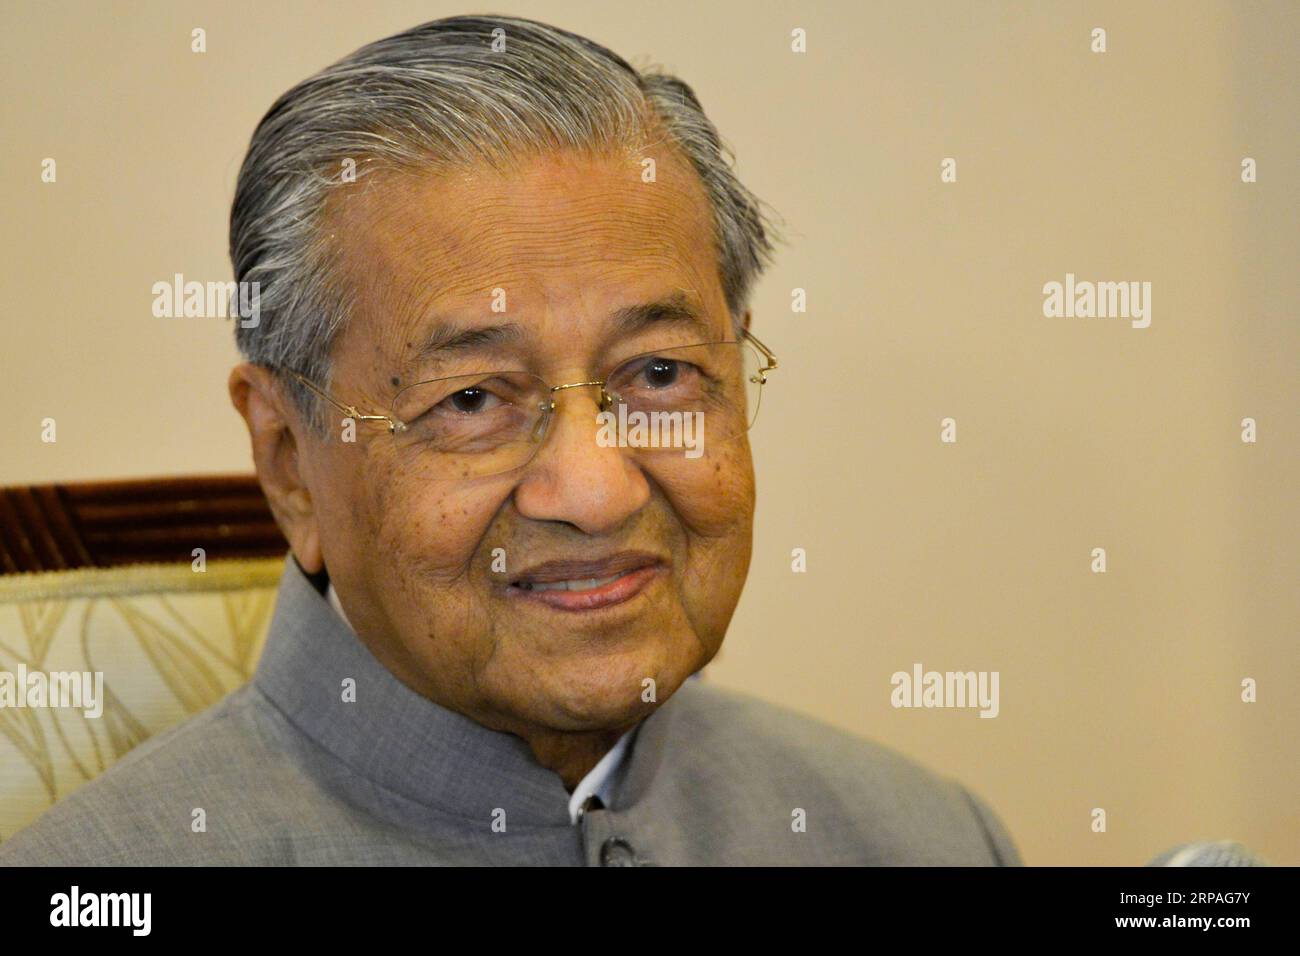 (190509) -- PUTRAJAYA, May 9, 2019 (Xinhua) -- Malaysian Prime Minister Mahathir Mohamad attends a press conference to mark the first year since his Pakatan Harapan (PH) coalition won power at the national polls on May 9 last year, in Putrajaya, Malaysia, May 9, 2019. Malaysia has achieved progress in combating corruption and in restoring government institutions after taking over the government in a smooth transition but much remains to be done especially in repairing the national economy, Malaysian Prime Minister Mahathir Mohamad said on Thursday. (Xinhua/Chong Voon Chung) MALAYSIA-PUTRAJAYA- Stock Photo